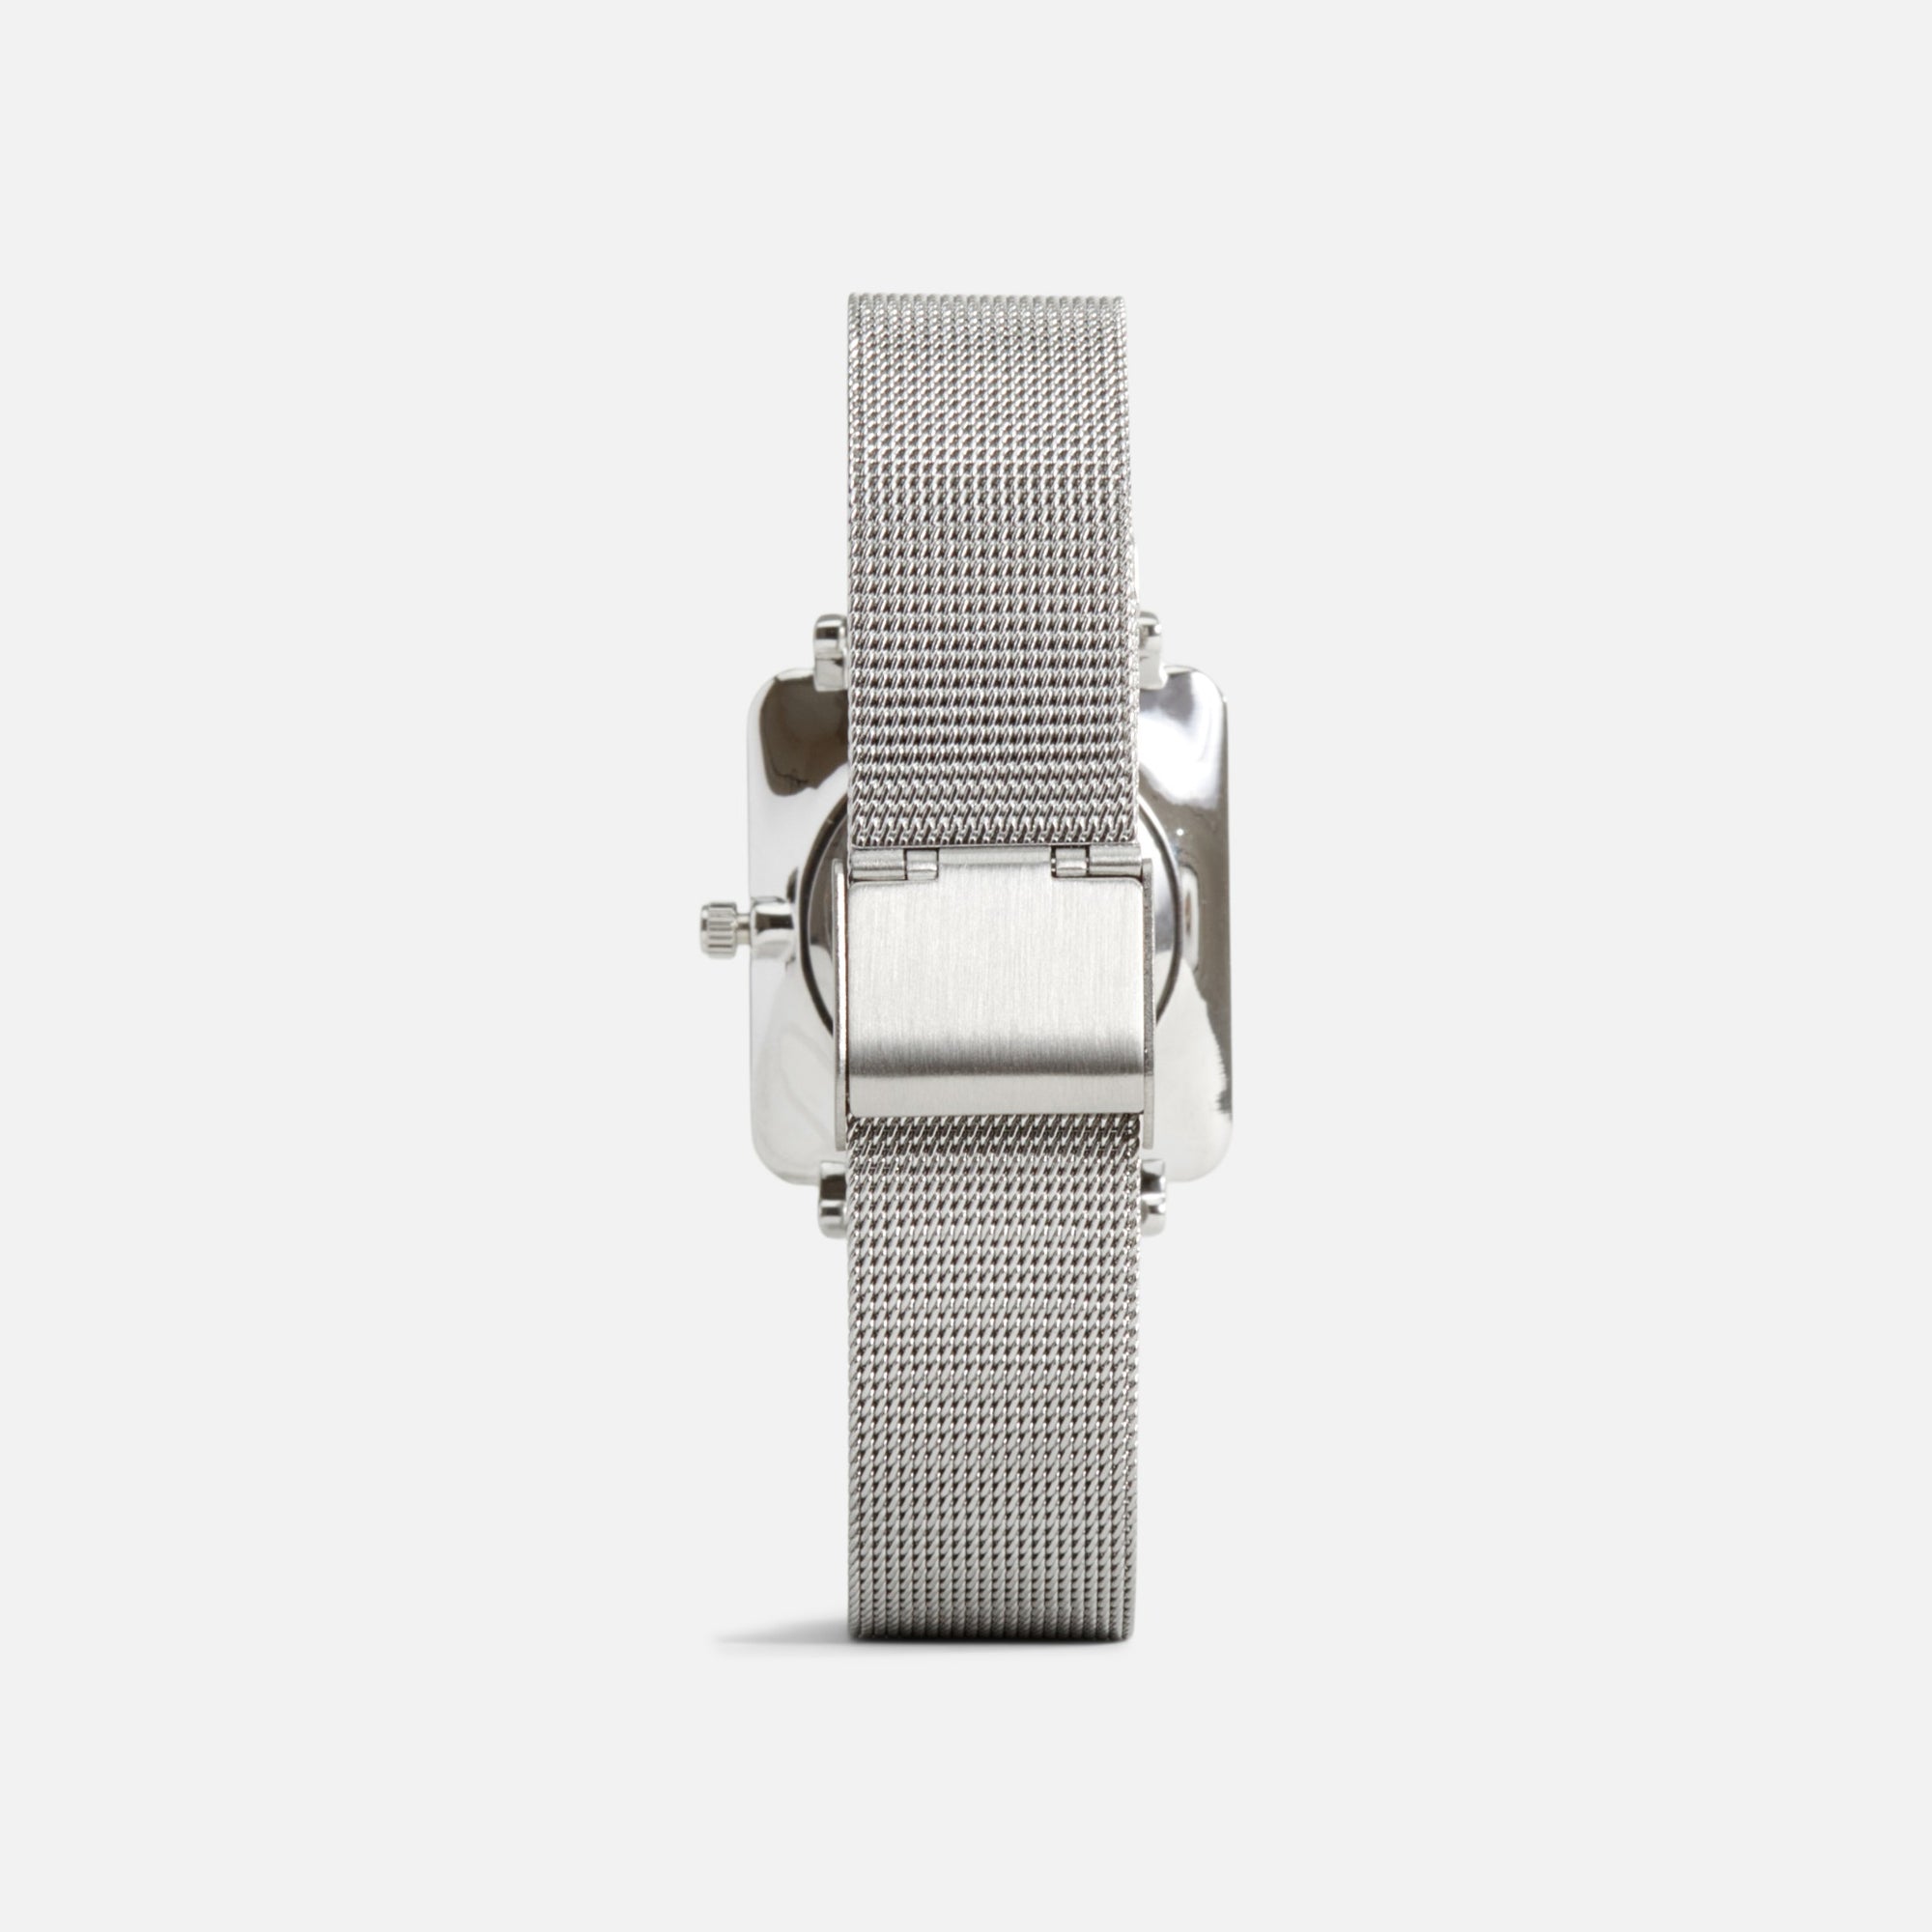 Minima collection - silvered mesh bracelet watch with rectangular white dial